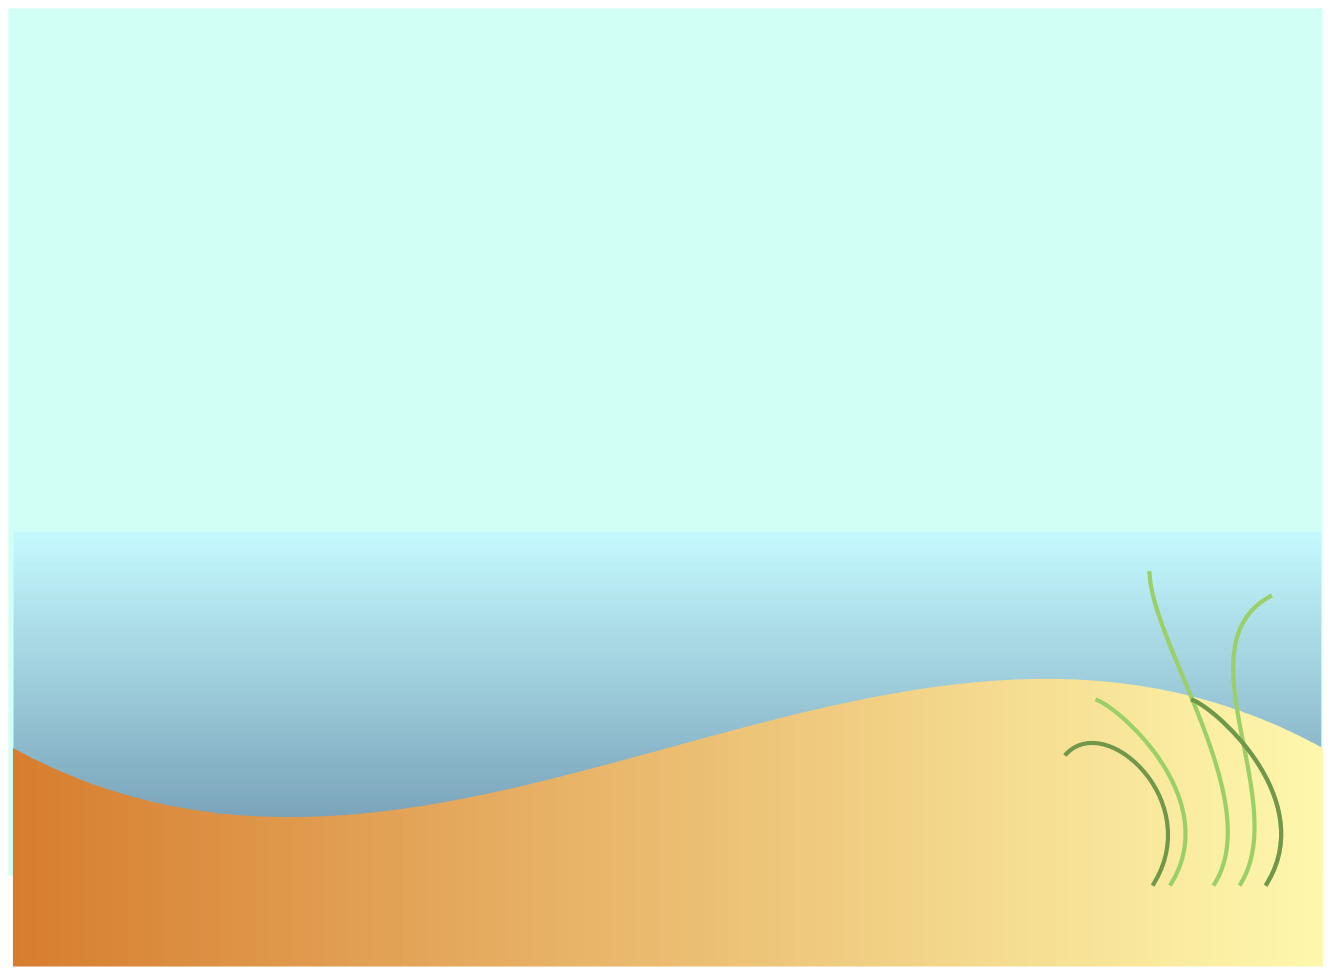 free clipart images beach - photo #7